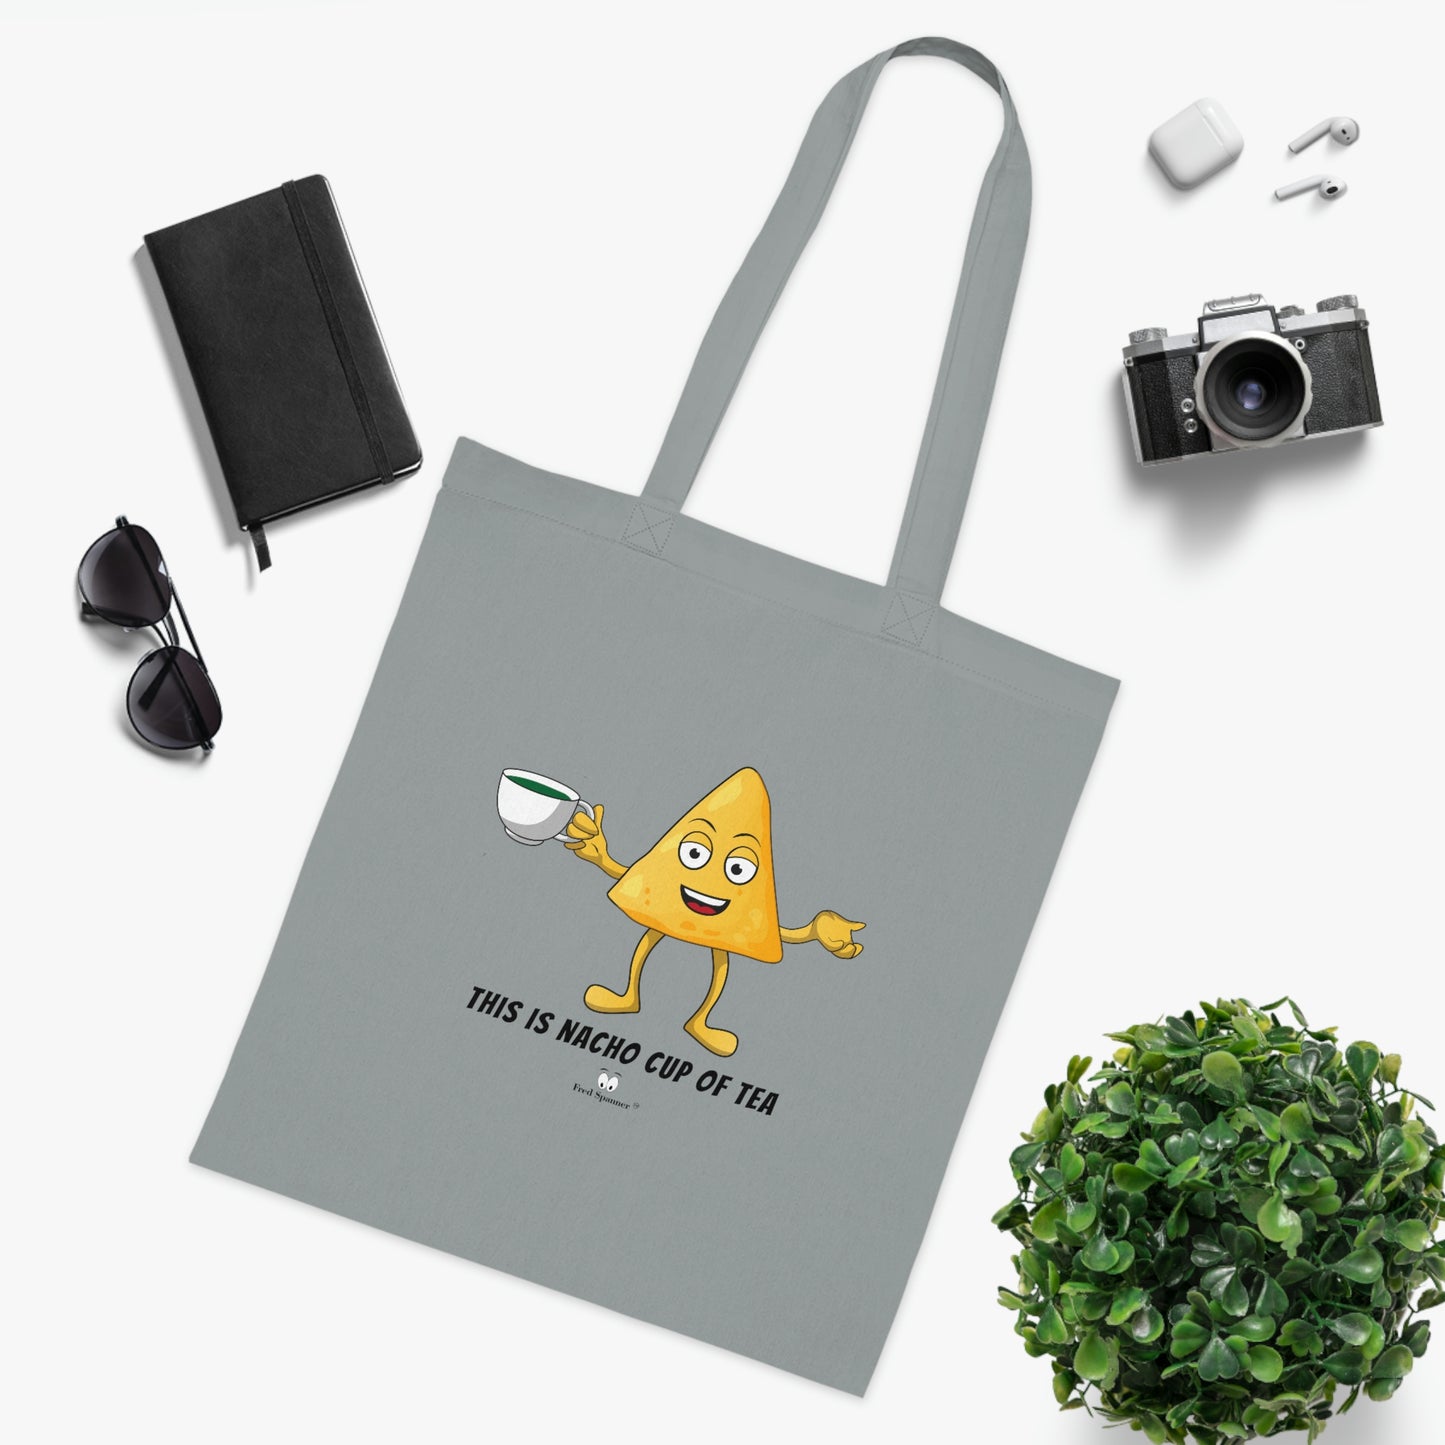 This is nacho cup of tea. Cotton Tote Bag